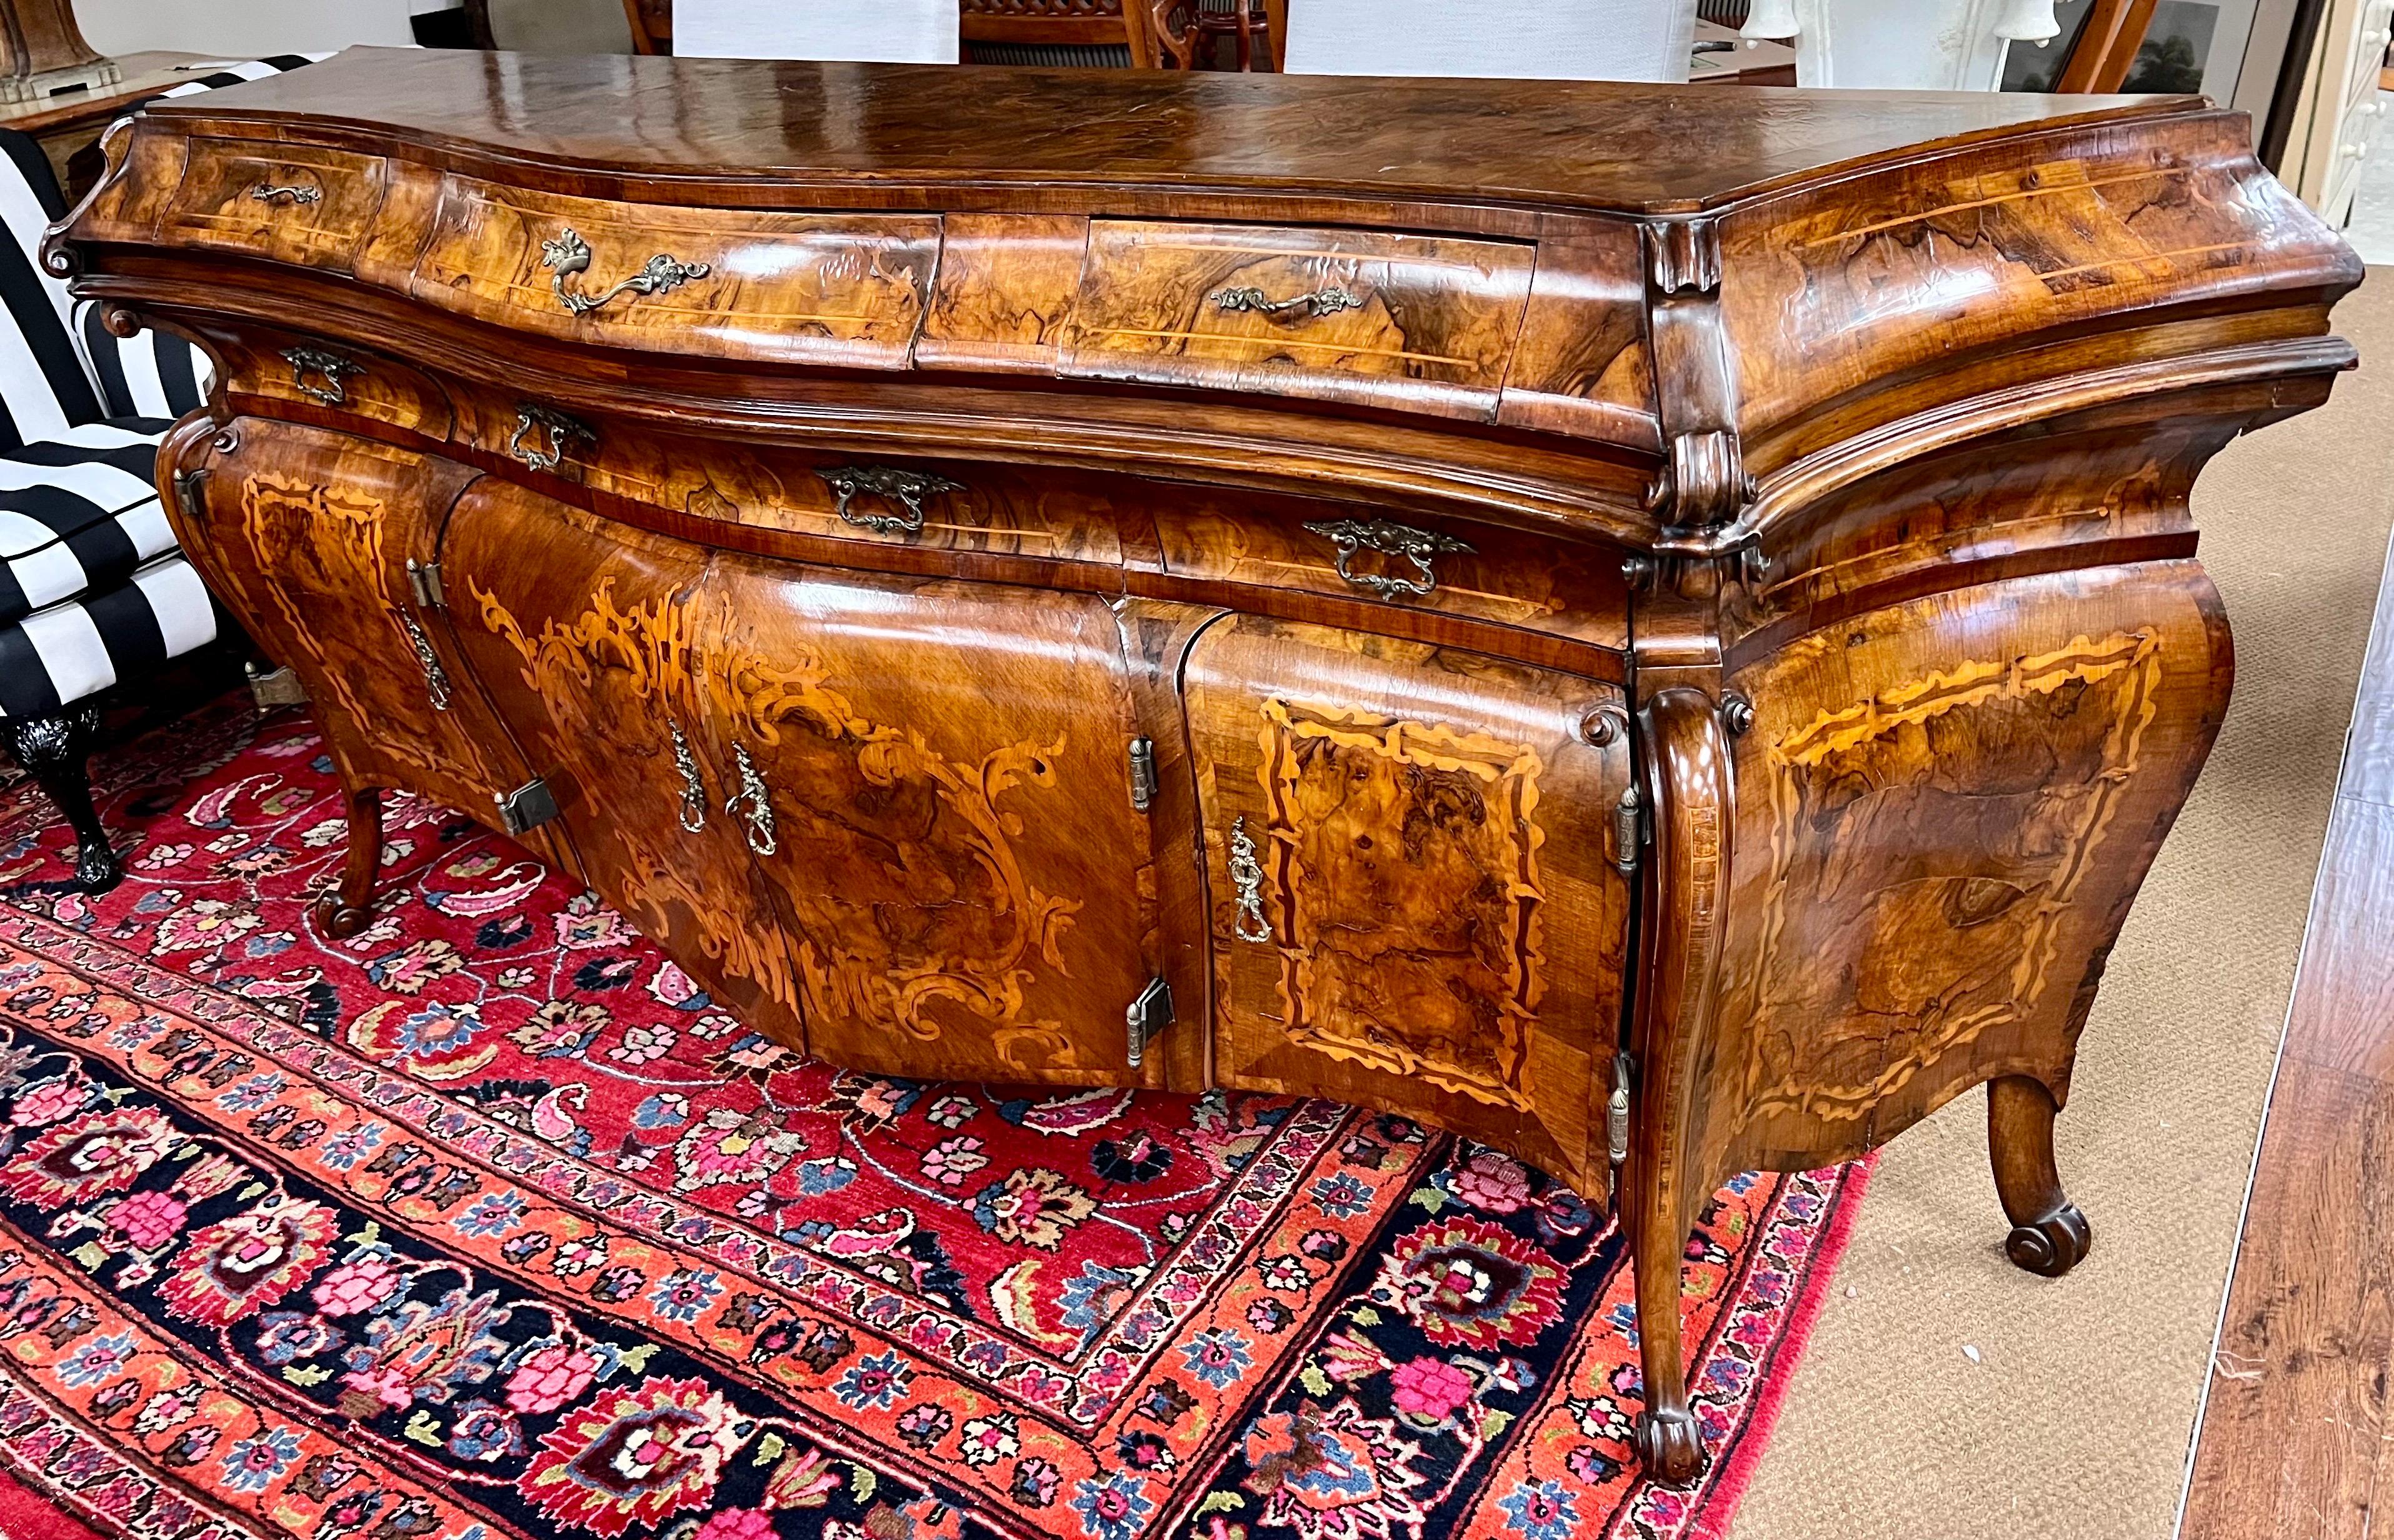 Discover opulence in every detail with this magnificent 19th century burr walnut marquetry French Bombe style credenza/sideboard.  Immerse yourself in the timeless allure of burr walnut, adorned with exquisite marquetry craftsmanship from the last